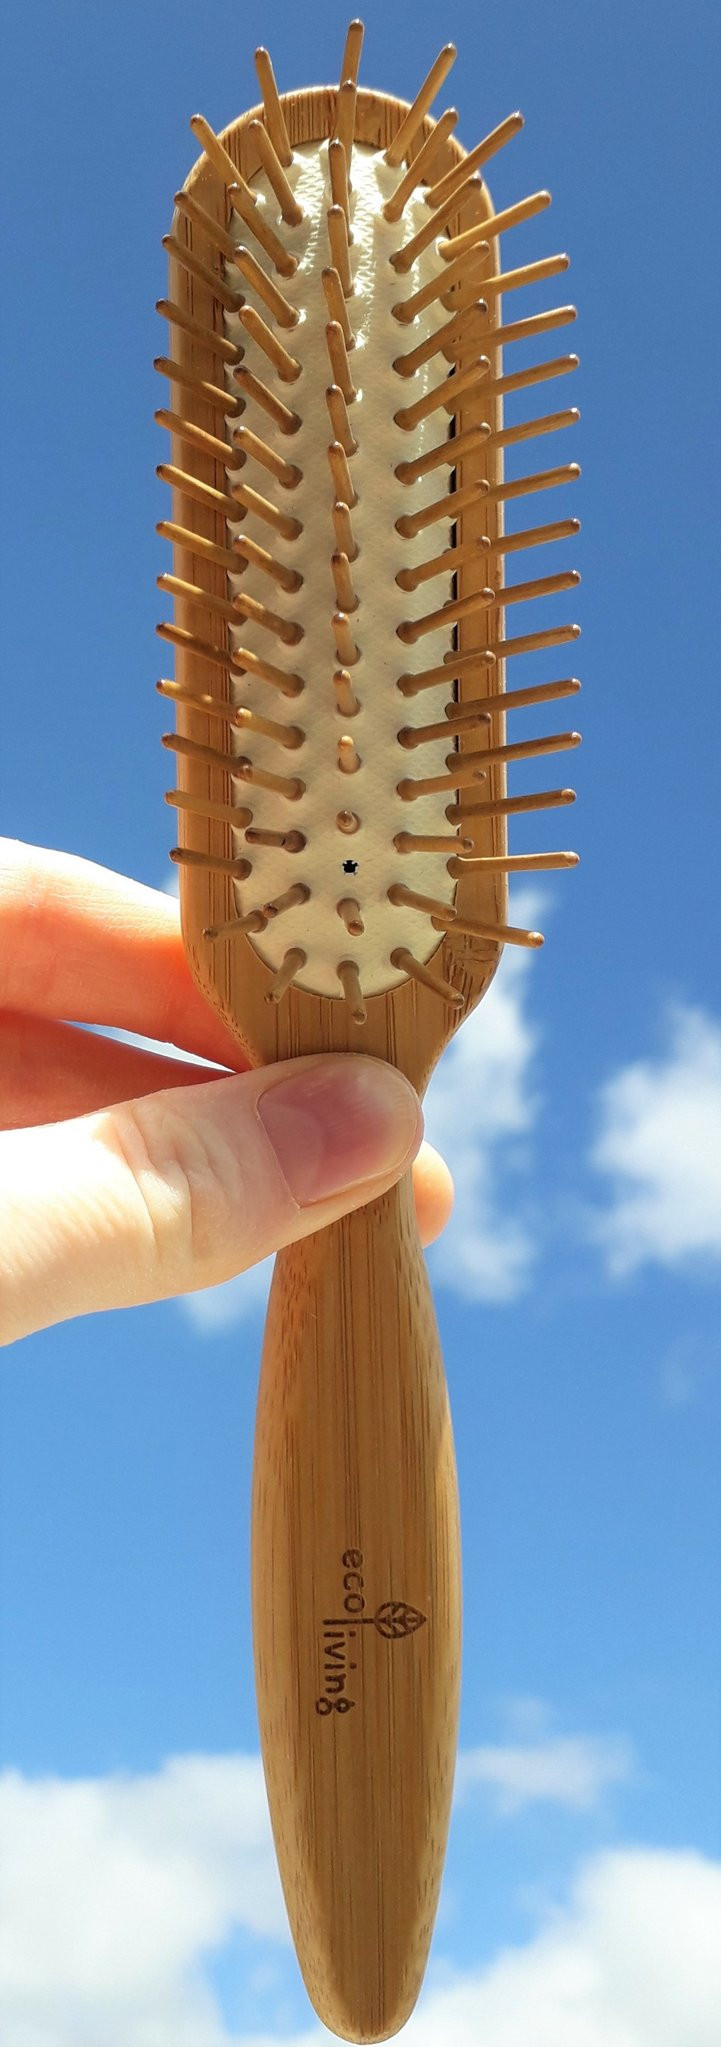 Bamboo Hairbrush with Wooden Pins